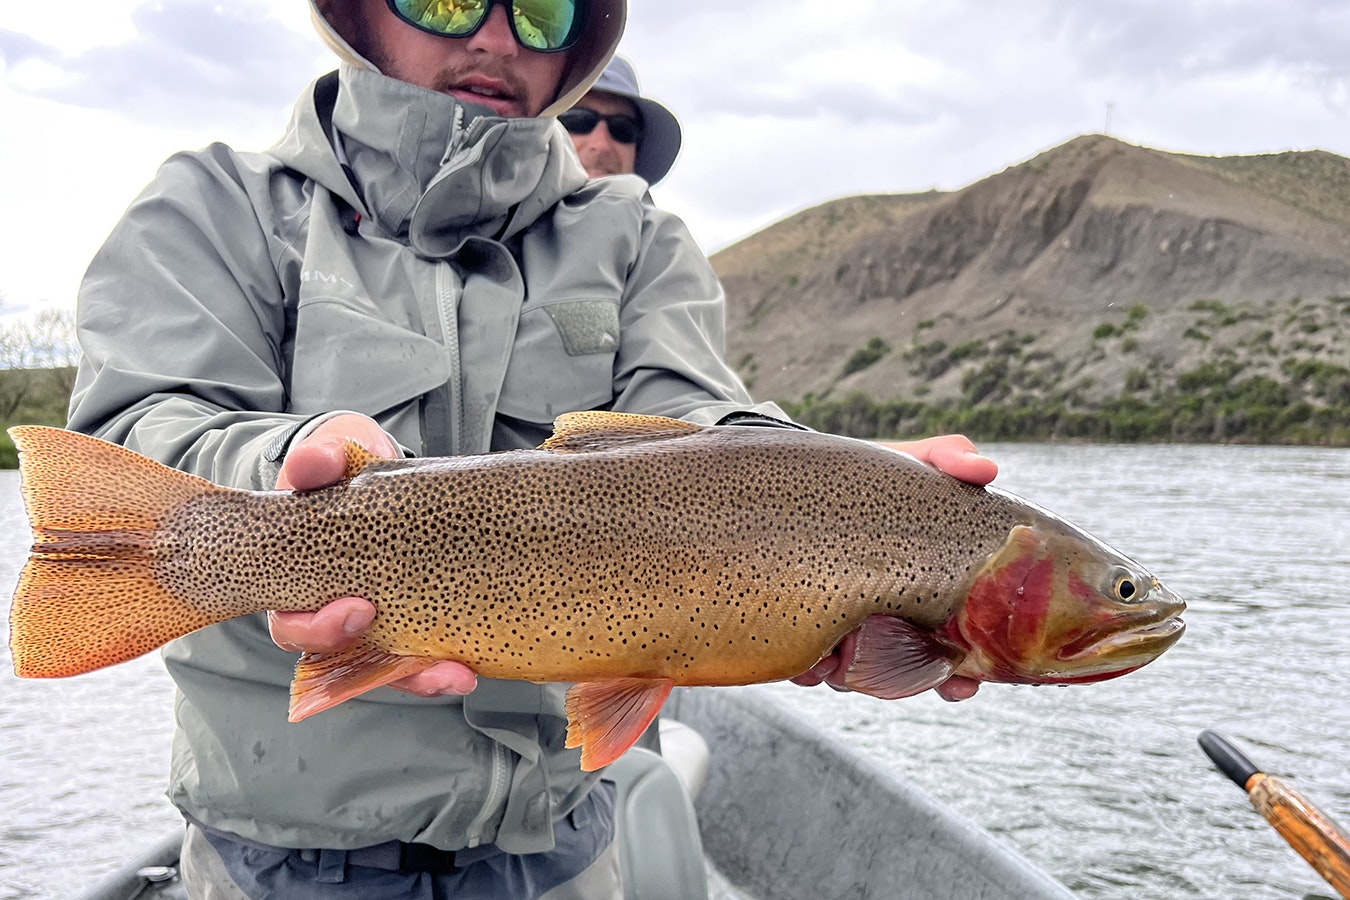 Fishing along the North Platte River in central Wyoming has already been good this spring.